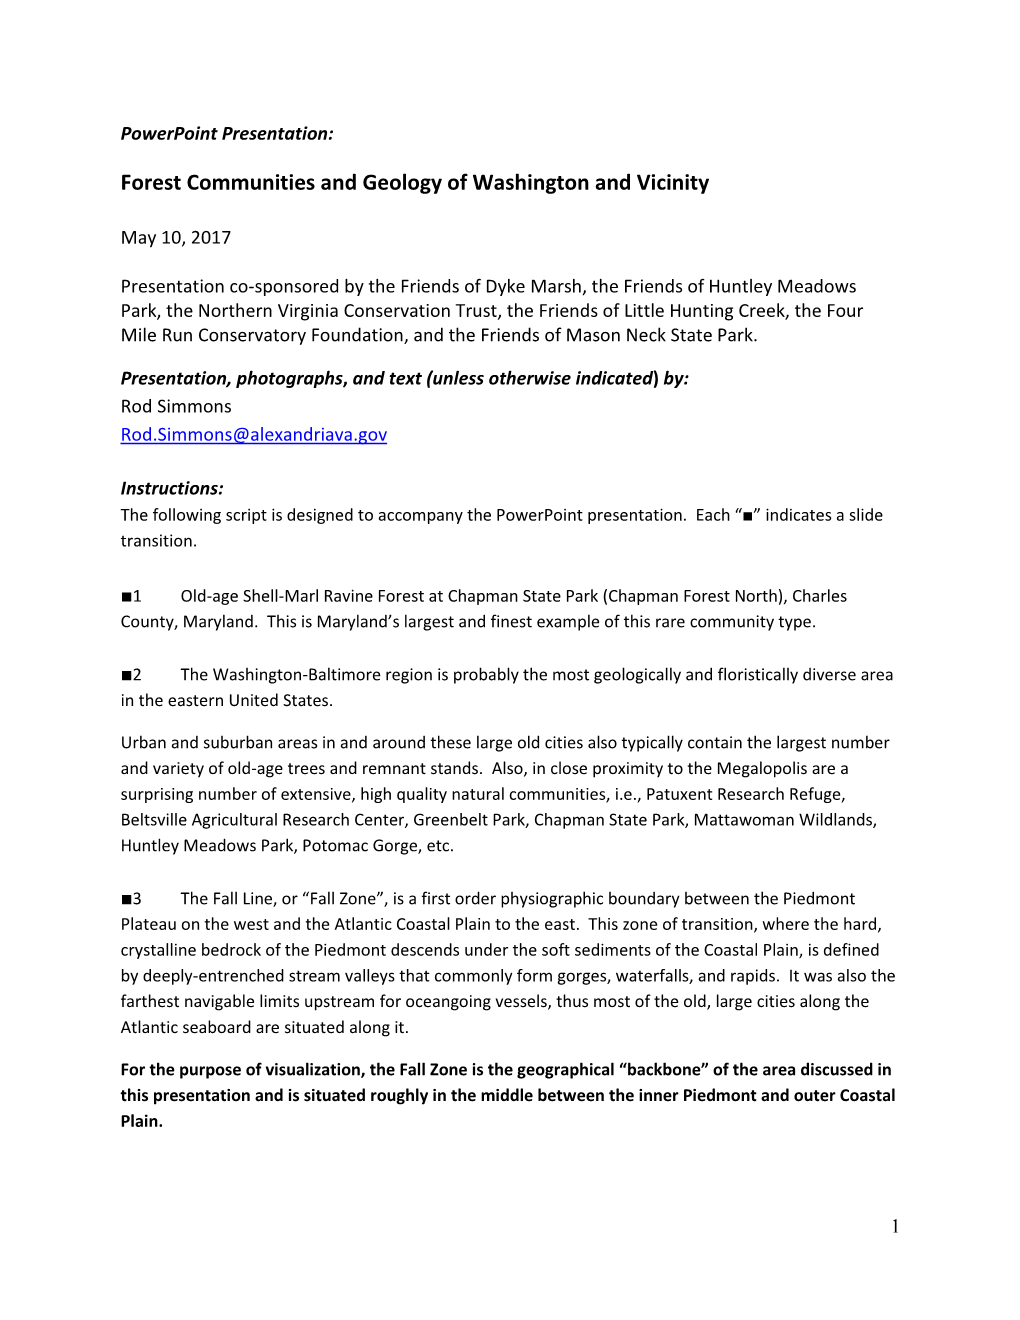 Forest Communities and Geology of Washington and Vicinity